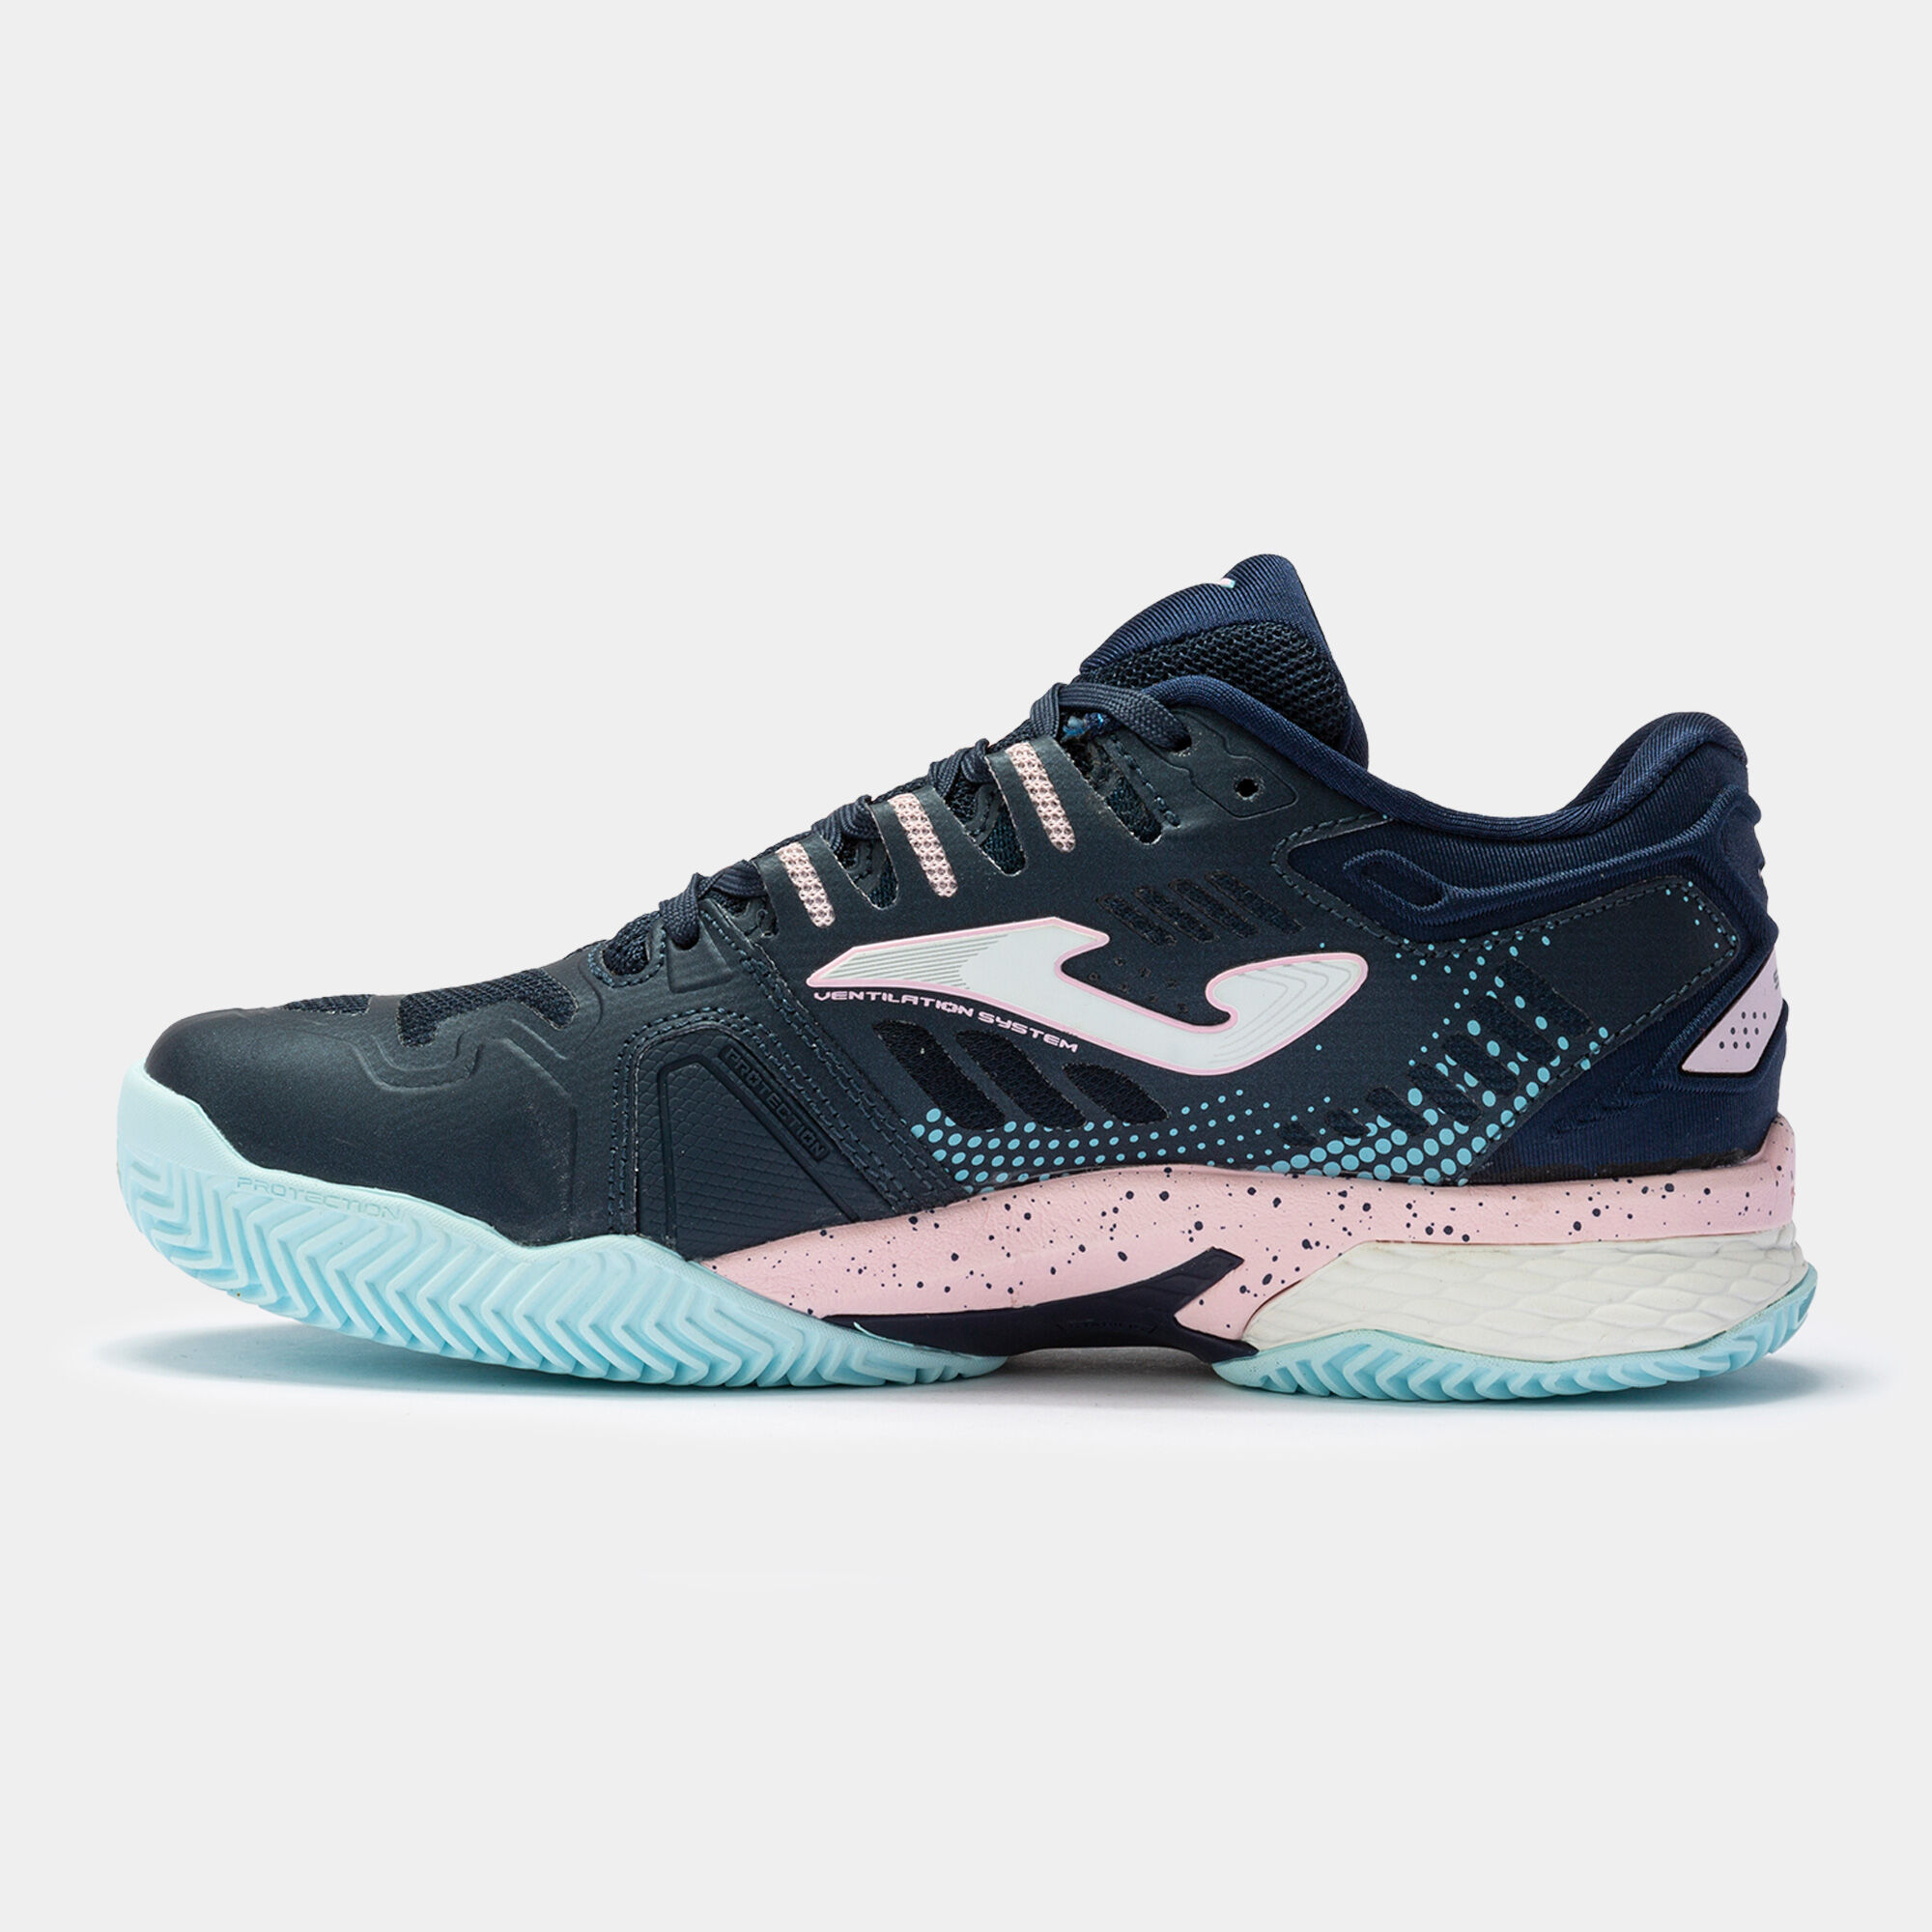 SHOES SLAM 22 CLAY WOMAN NAVY BLUE PINK